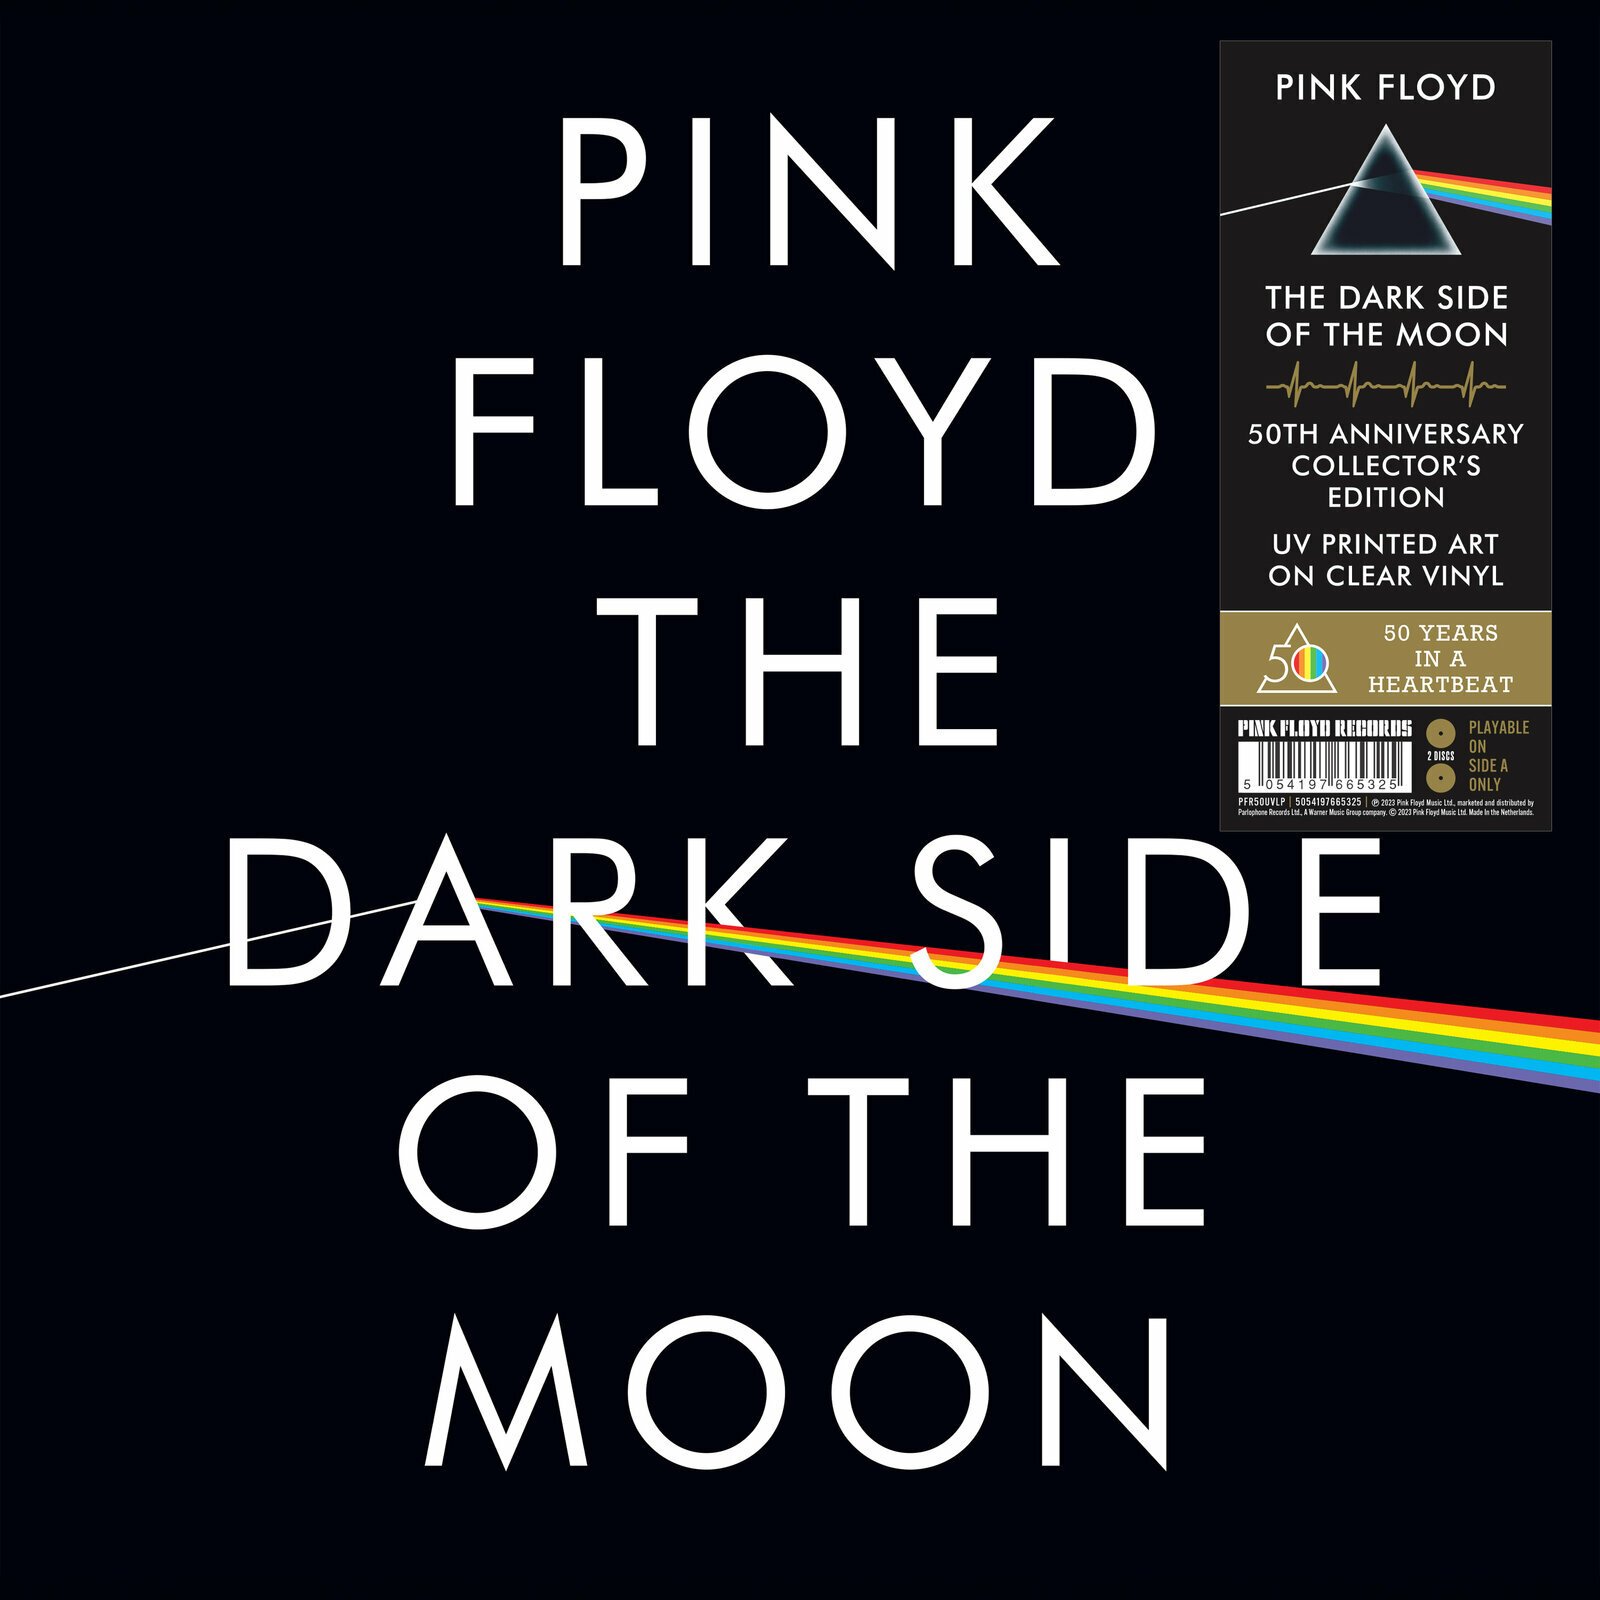 Vinyl Record Pink Floyd - The Dark Side Of The Moon (50th Anniversary Edition) (Limited Edition) (Picture Disc) (2 LP)